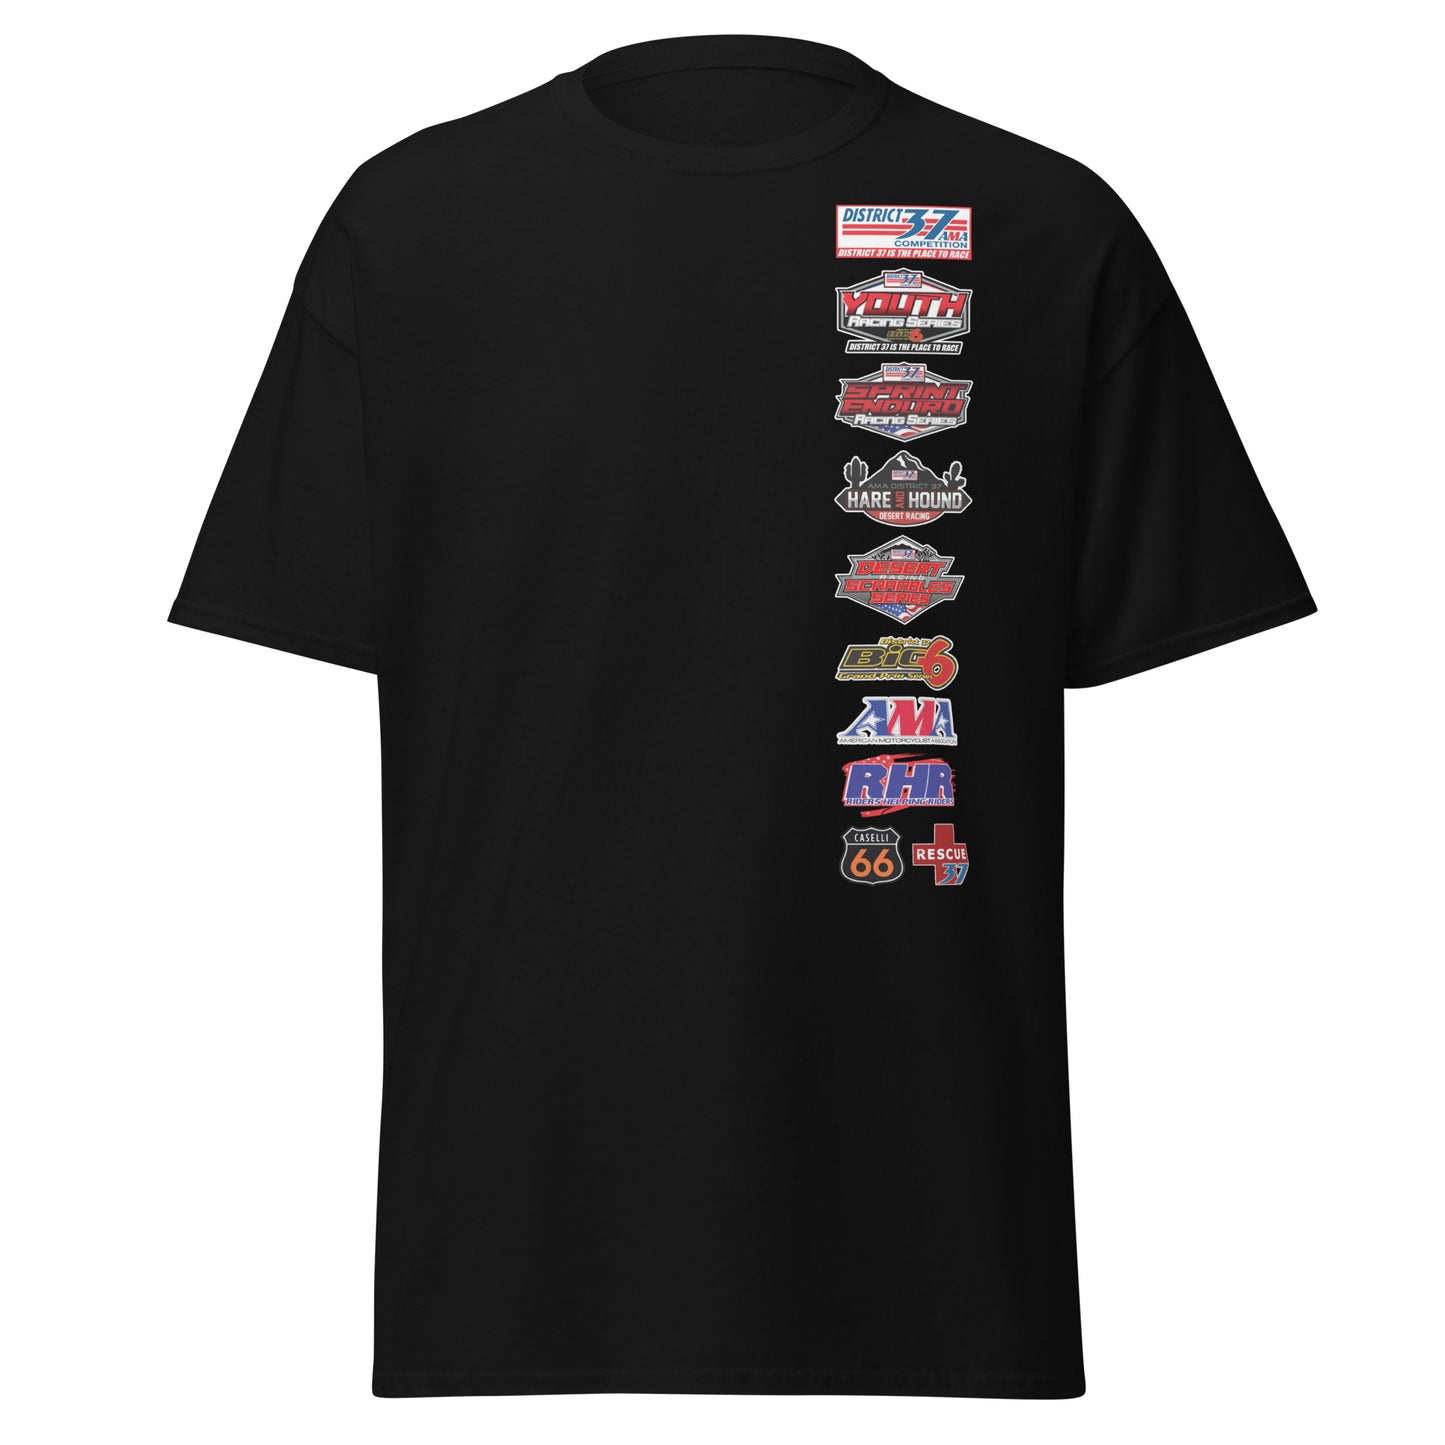 D37 Youth Series Shirt - Adult Size Shirt